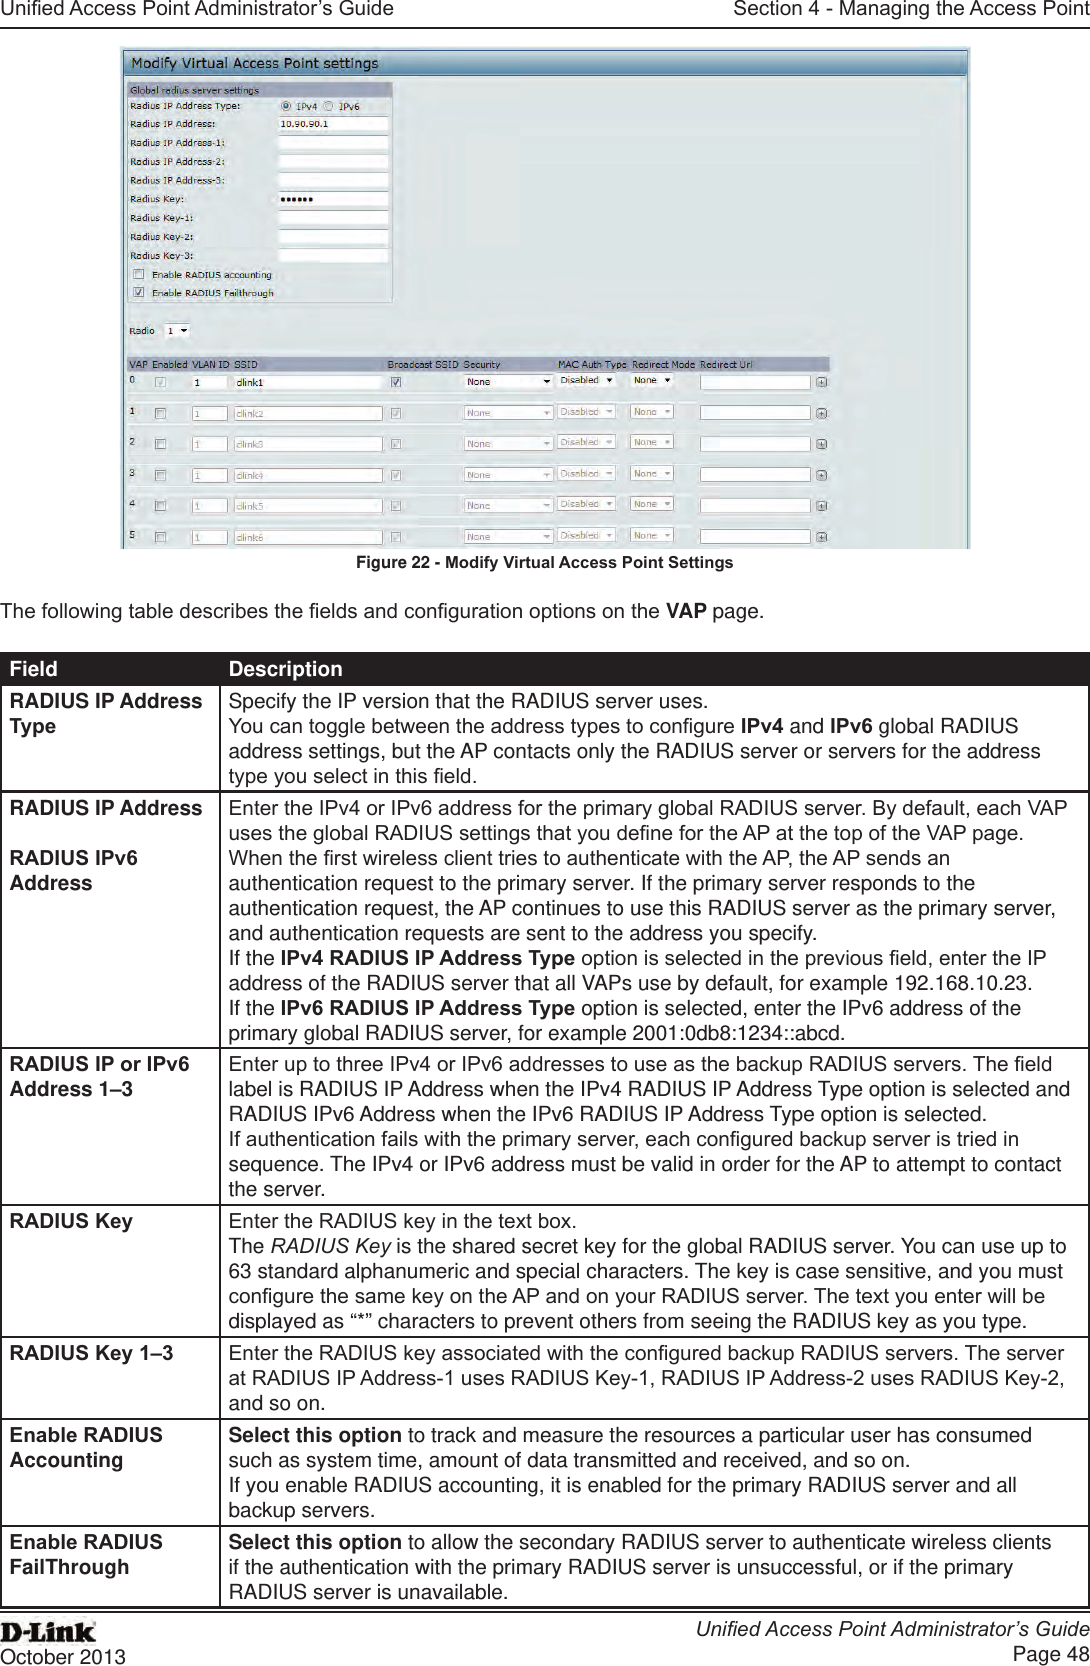 Unied Access Point Administrator’s GuideUnied Access Point Administrator’s GuidePage 48October 2013Section 4 - Managing the Access PointFigure 22 - Modify Virtual Access Point SettingsThe following table describes the elds and conguration options on the VAP page.Field DescriptionRADIUS IP Address TypeSpecify the IP version that the RADIUS server uses.You can toggle between the address types to congure IPv4 and IPv6 global RADIUS address settings, but the AP contacts only the RADIUS server or servers for the address type you select in this eld.RADIUS IP Address RADIUS IPv6 AddressEnter the IPv4 or IPv6 address for the primary global RADIUS server. By default, each VAP uses the global RADIUS settings that you dene for the AP at the top of the VAP page.When the rst wireless client tries to authenticate with the AP, the AP sends an authentication request to the primary server. If the primary server responds to the authentication request, the AP continues to use this RADIUS server as the primary server, and authentication requests are sent to the address you specify.If the IPv4 RADIUS IP Address Type option is selected in the previous eld, enter the IP address of the RADIUS server that all VAPs use by default, for example 192.168.10.23. If the IPv6 RADIUS IP Address Type option is selected, enter the IPv6 address of the primary global RADIUS server, for example 2001:0db8:1234::abcd.RADIUS IP or IPv6 Address 1–3 Enter up to three IPv4 or IPv6 addresses to use as the backup RADIUS servers. The eld label is RADIUS IP Address when the IPv4 RADIUS IP Address Type option is selected and RADIUS IPv6 Address when the IPv6 RADIUS IP Address Type option is selected.If authentication fails with the primary server, each congured backup server is tried in sequence. The IPv4 or IPv6 address must be valid in order for the AP to attempt to contact the server.RADIUS Key Enter the RADIUS key in the text box.The RADIUS Key is the shared secret key for the global RADIUS server. You can use up to 63 standard alphanumeric and special characters. The key is case sensitive, and you must congure the same key on the AP and on your RADIUS server. The text you enter will be displayed as “*” characters to prevent others from seeing the RADIUS key as you type.RADIUS Key 1–3 Enter the RADIUS key associated with the congured backup RADIUS servers. The server at RADIUS IP Address-1 uses RADIUS Key-1, RADIUS IP Address-2 uses RADIUS Key-2, and so on.Enable RADIUS Accounting Select this option to track and measure the resources a particular user has consumed such as system time, amount of data transmitted and received, and so on.If you enable RADIUS accounting, it is enabled for the primary RADIUS server and all backup servers.Enable RADIUS FailThrough Select this option to allow the secondary RADIUS server to authenticate wireless clients if the authentication with the primary RADIUS server is unsuccessful, or if the primary RADIUS server is unavailable.